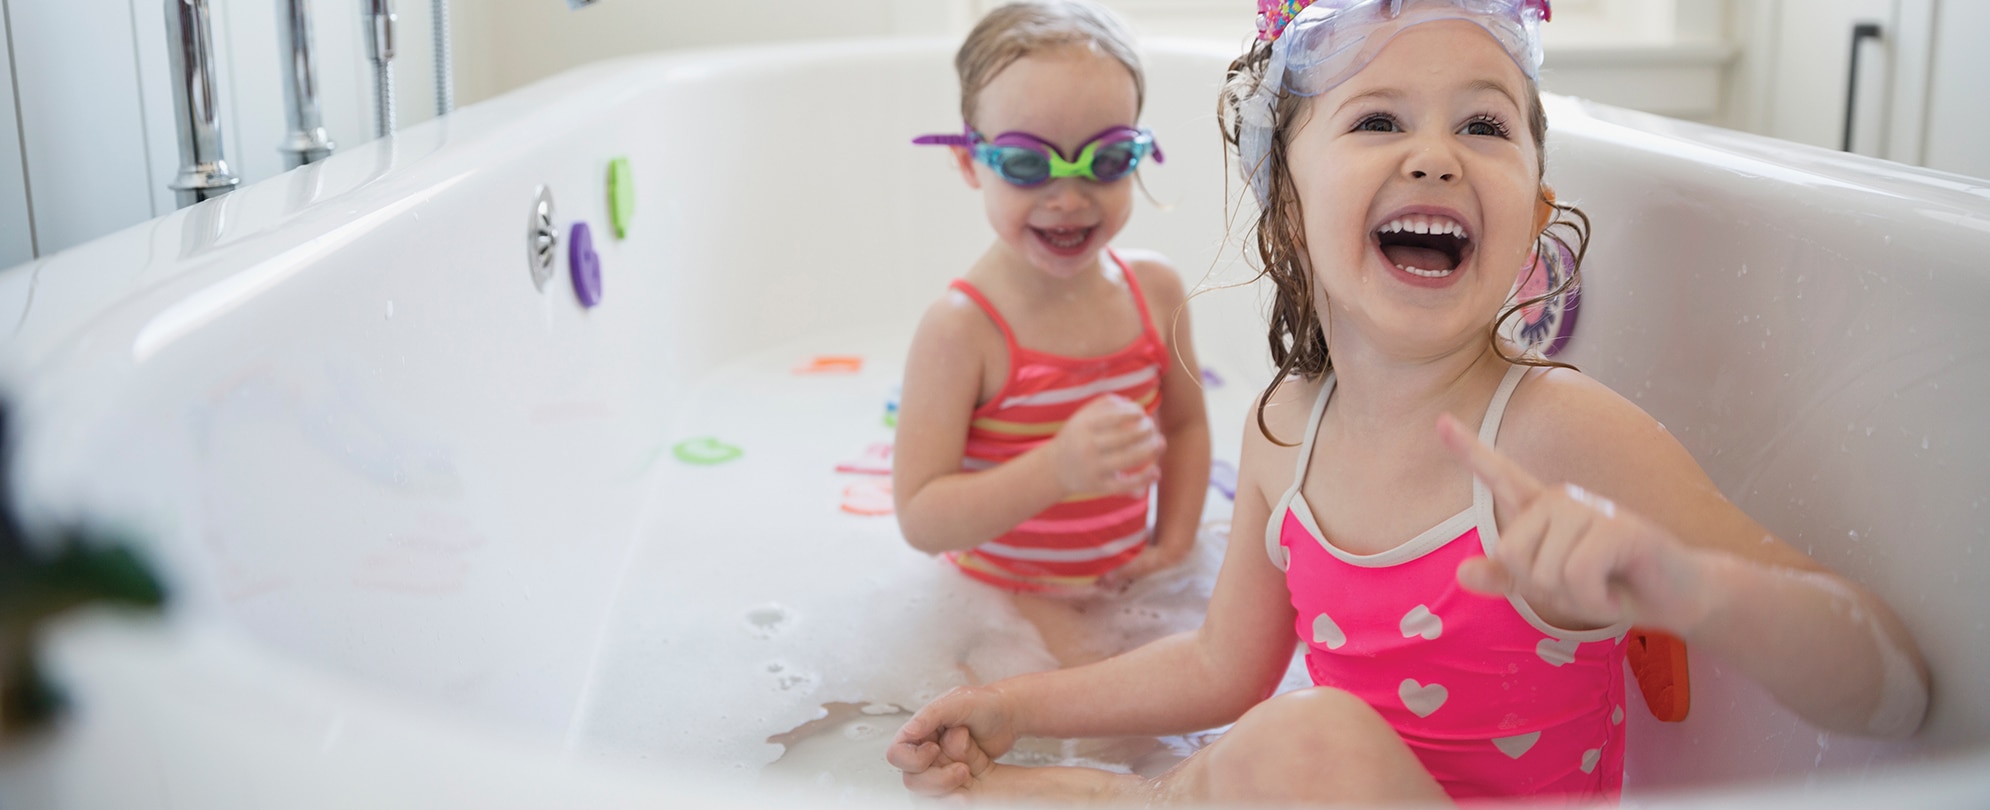 Two smiling young girls wearing goggles and swimsuits play in a bubble bath at a WorldMark by Wyndham resort.